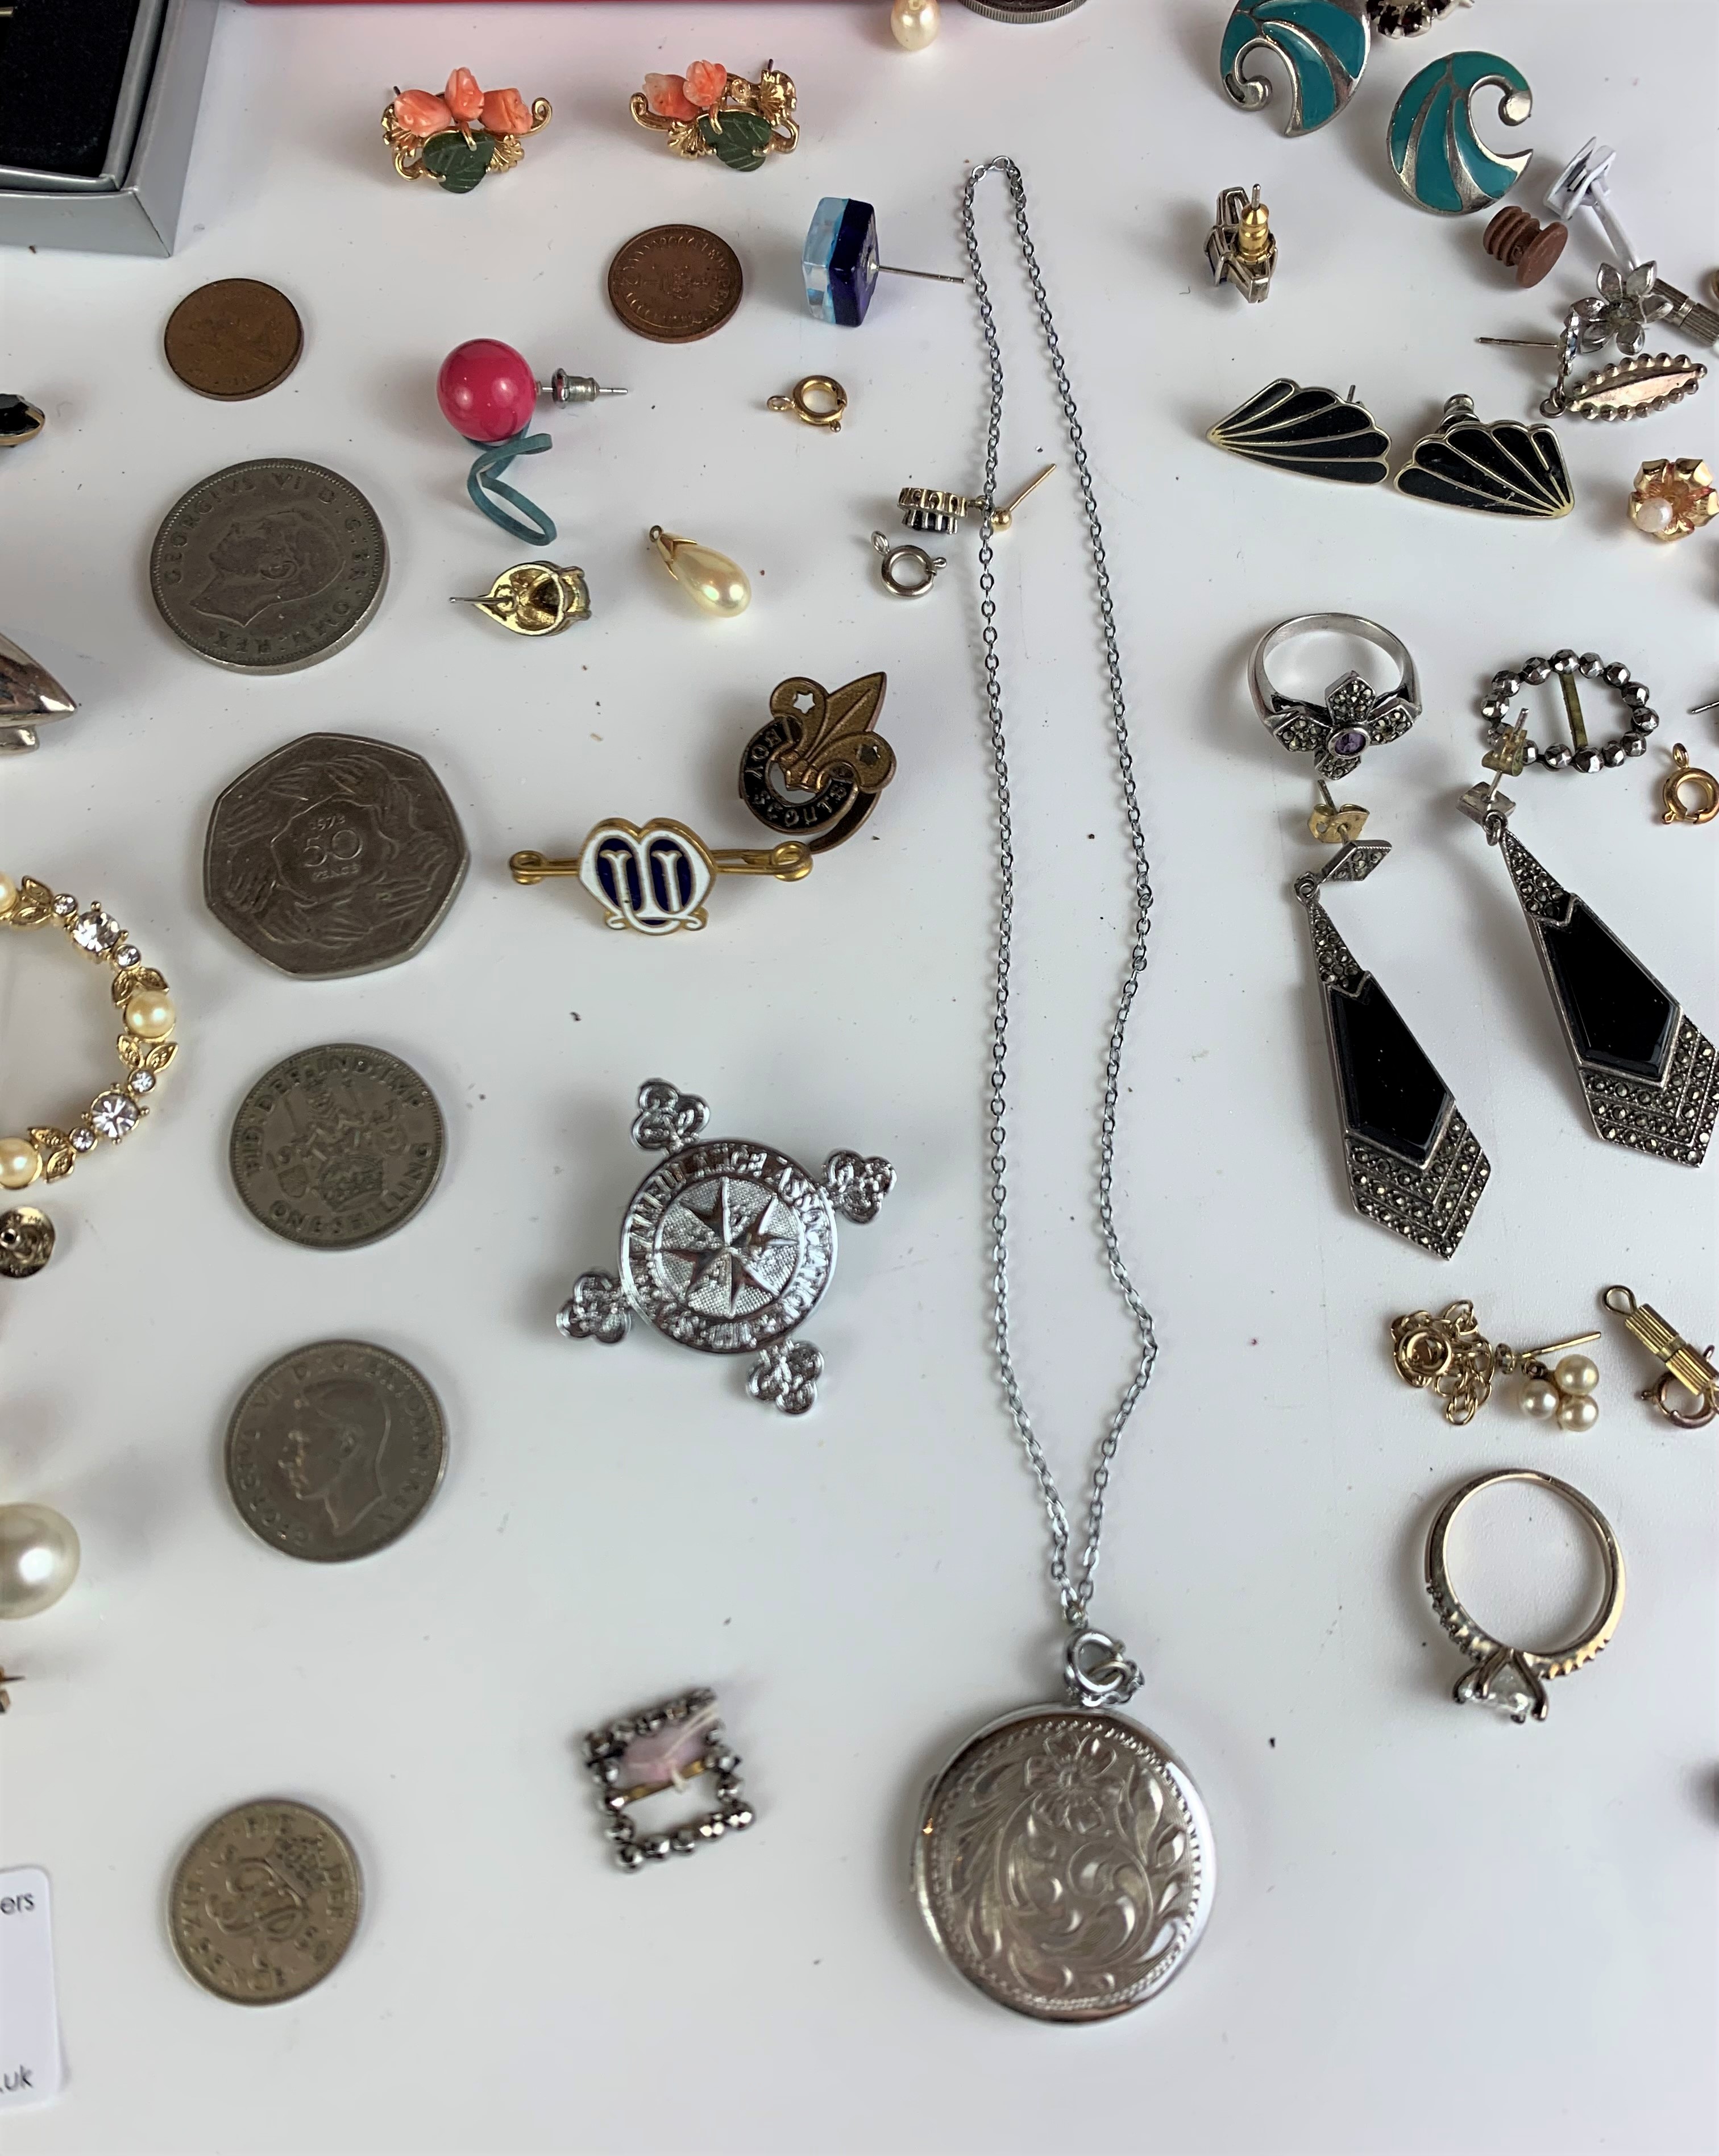 Dress jewellery including brooches, earrings, rings, souvenir spoon, odd coins and Azur watch - Image 5 of 9